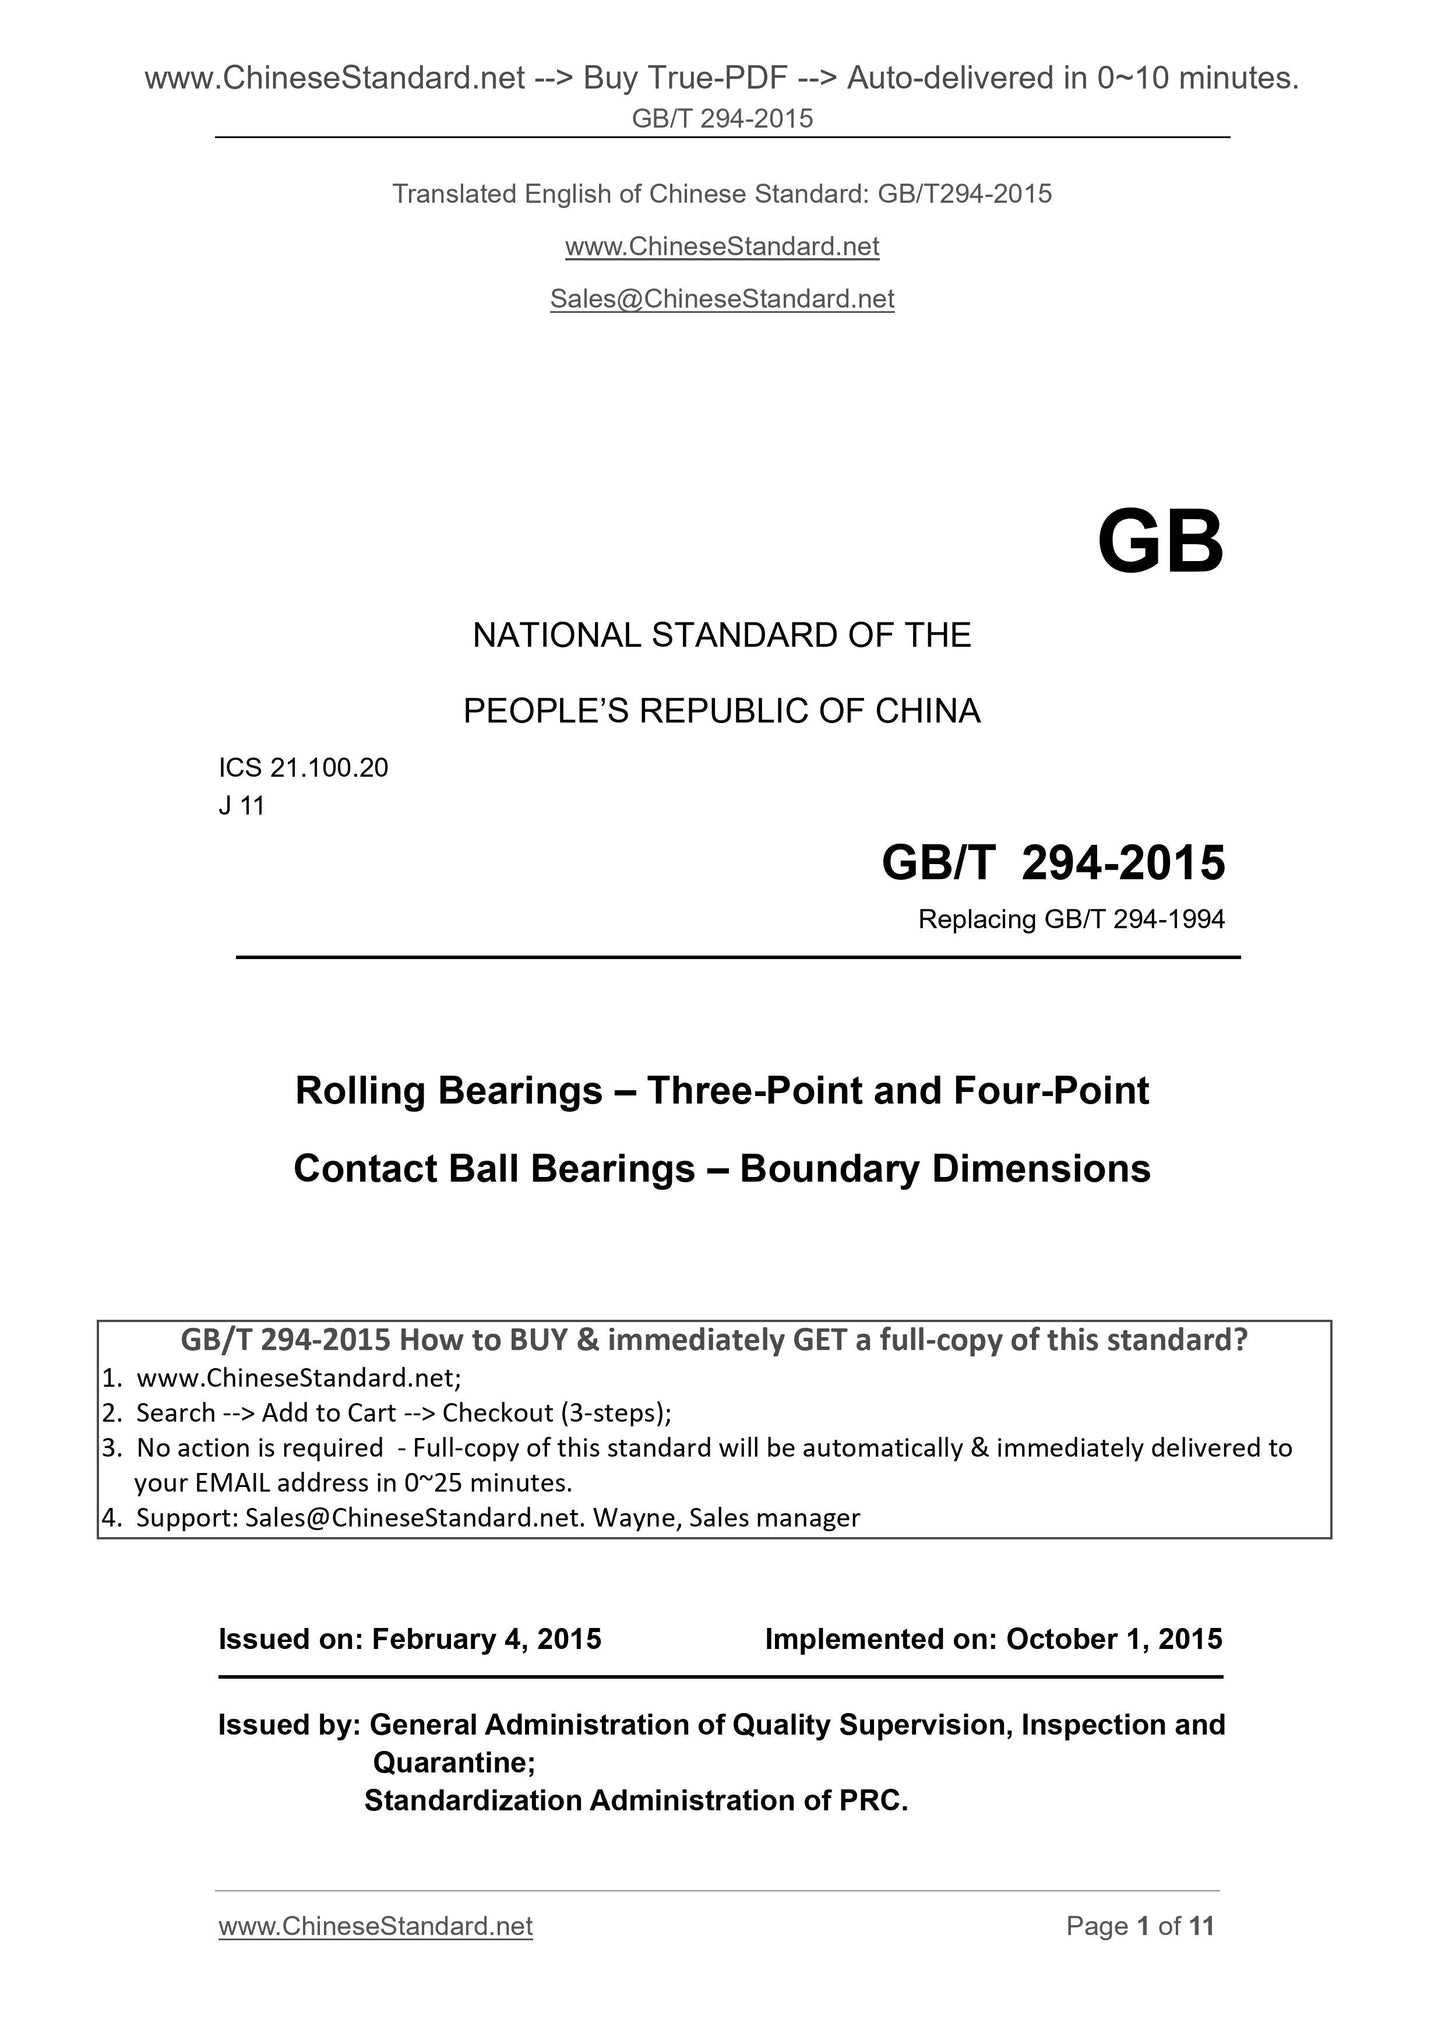 GB/T 294-2015 Page 1